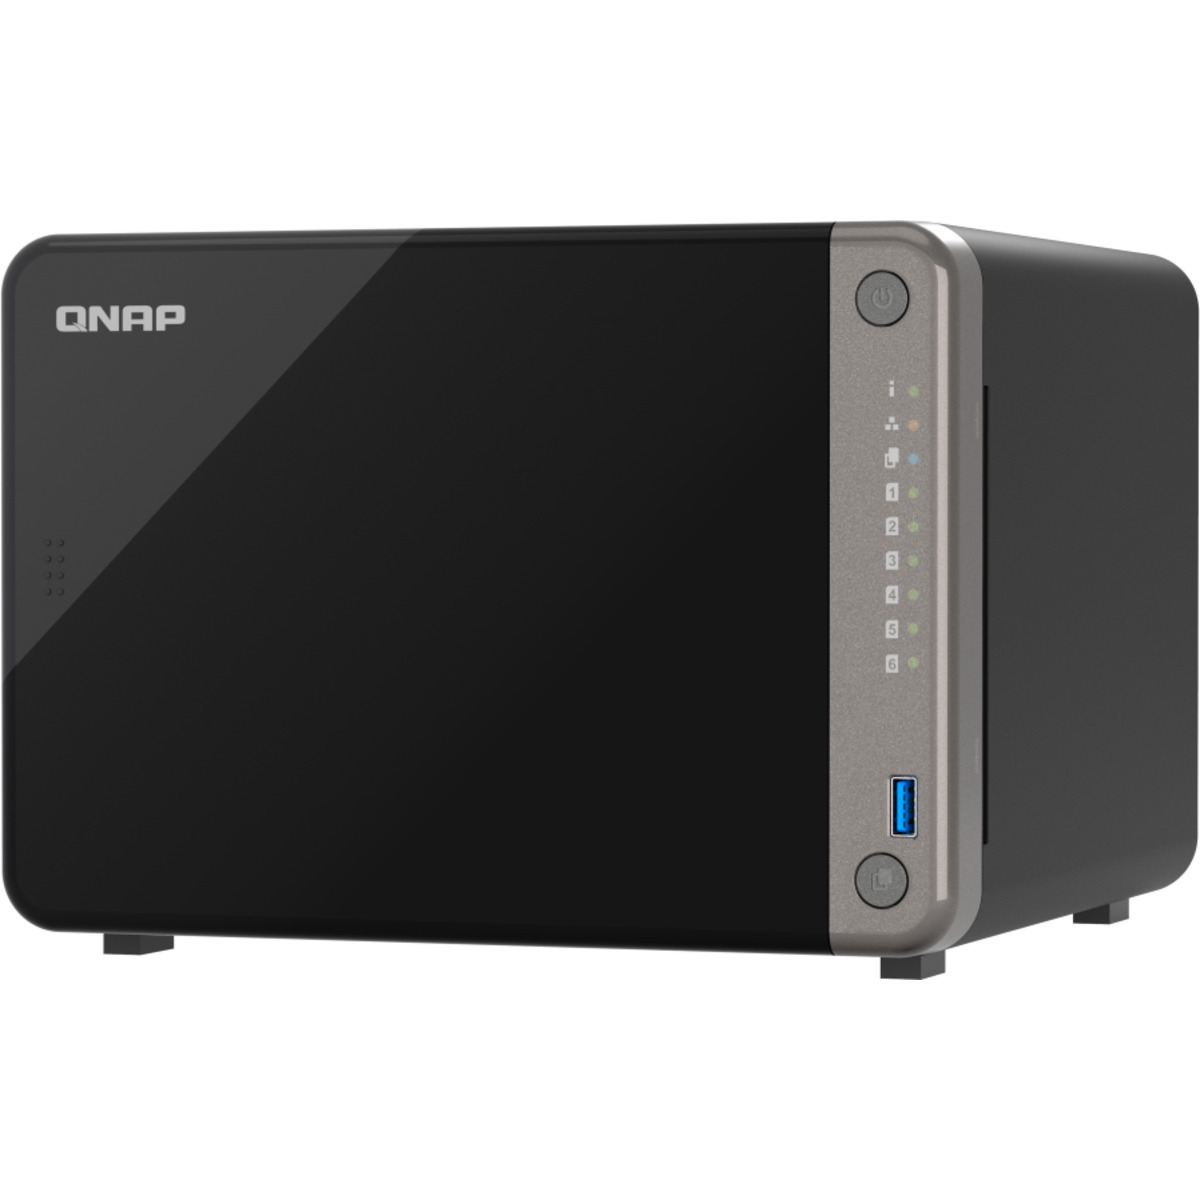 QNAP TS-AI642 32tb 6-Bay Desktop Multimedia / Power User / Business NAS - Network Attached Storage Device 4x8tb Seagate IronWolf ST8000VN004 3.5 7200rpm SATA 6Gb/s HDD NAS Class Drives Installed - Burn-In Tested TS-AI642